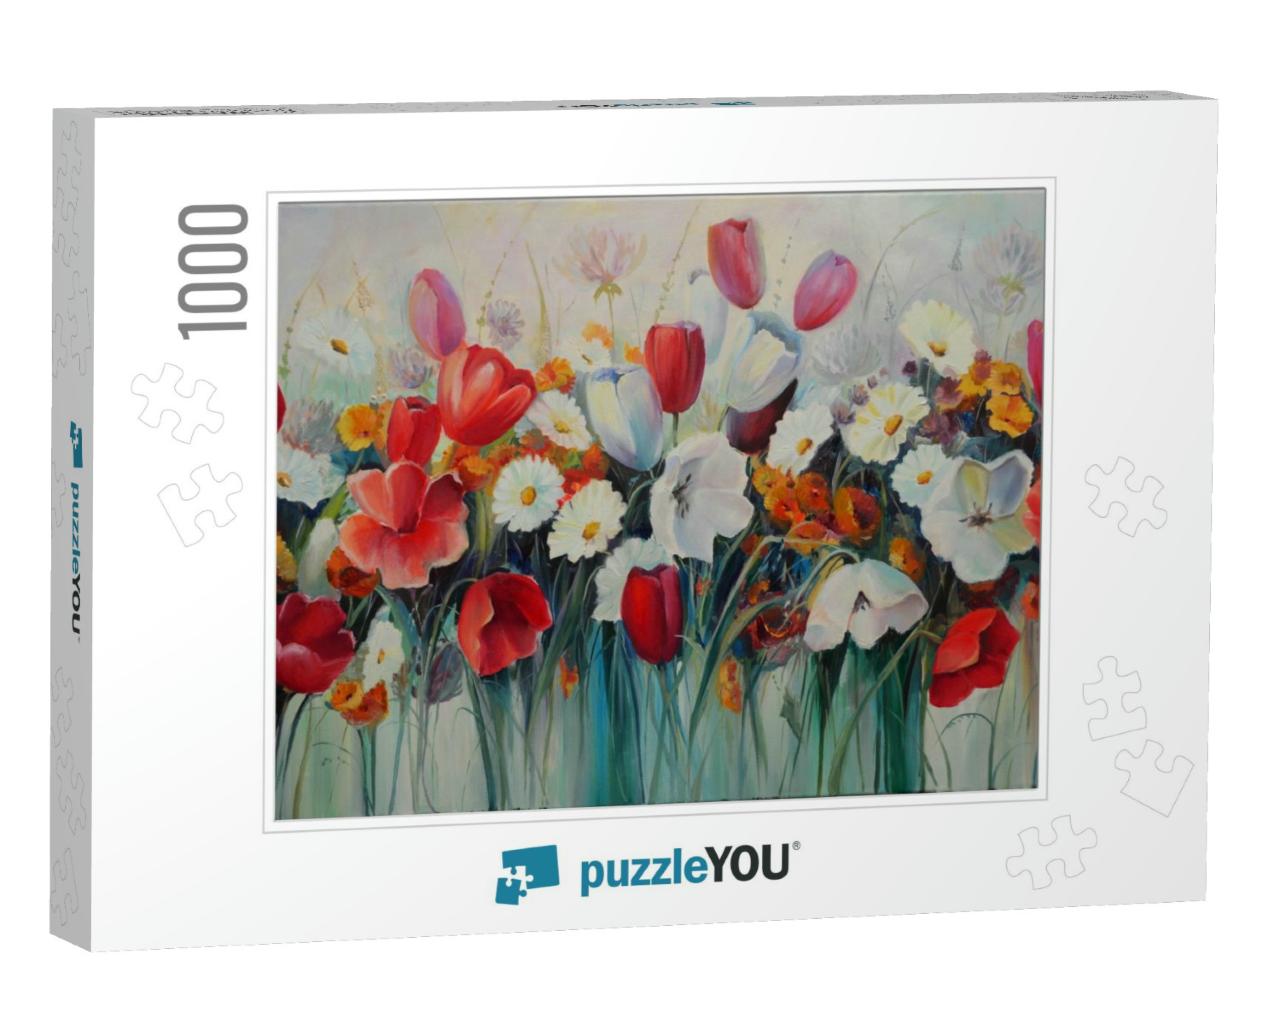 Painting Painted with Oil Paints on Canvas. Painting in t... Jigsaw Puzzle with 1000 pieces